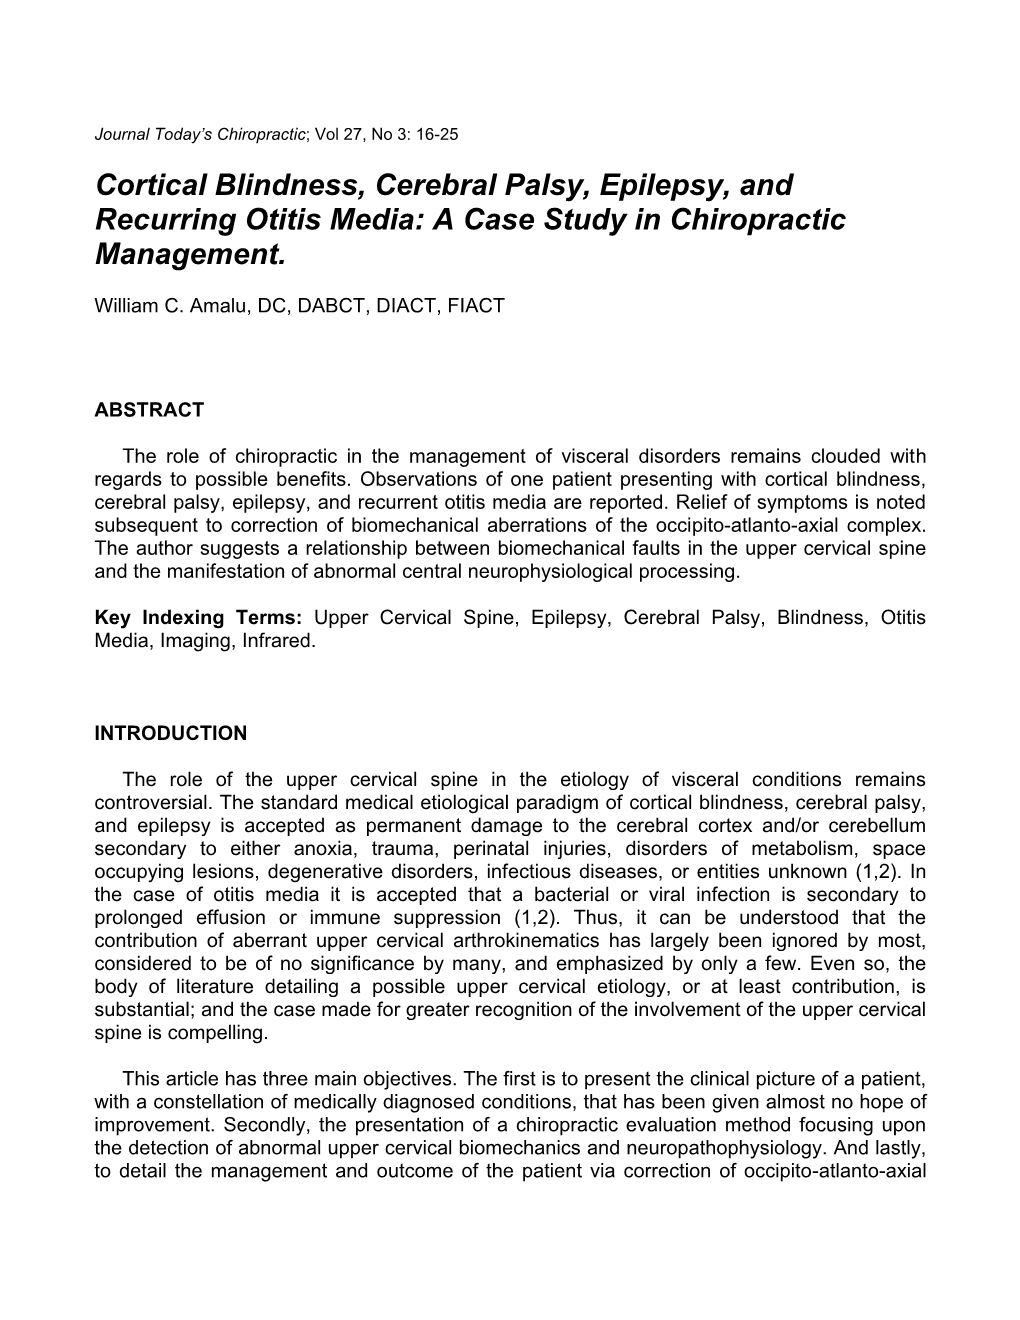 Cortical Blindness, Cerebral Palsy, Epilepsy, and Recurring Otitis Media: a Case Study in Chiropractic Management